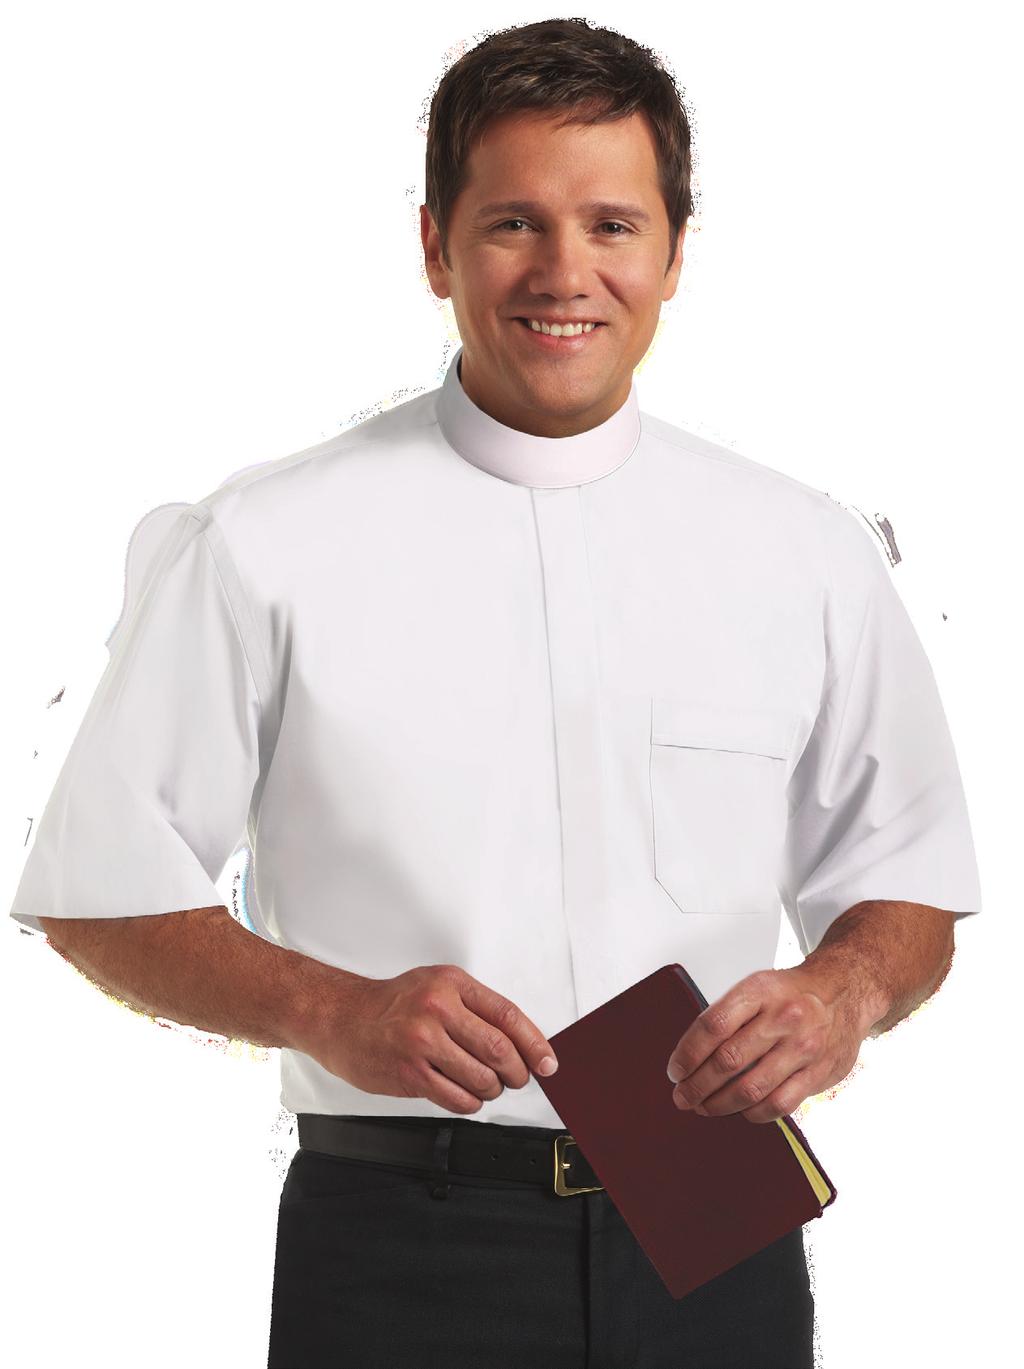 center back pleat and left front pocket. All shown with full clerical collar, sold separately.